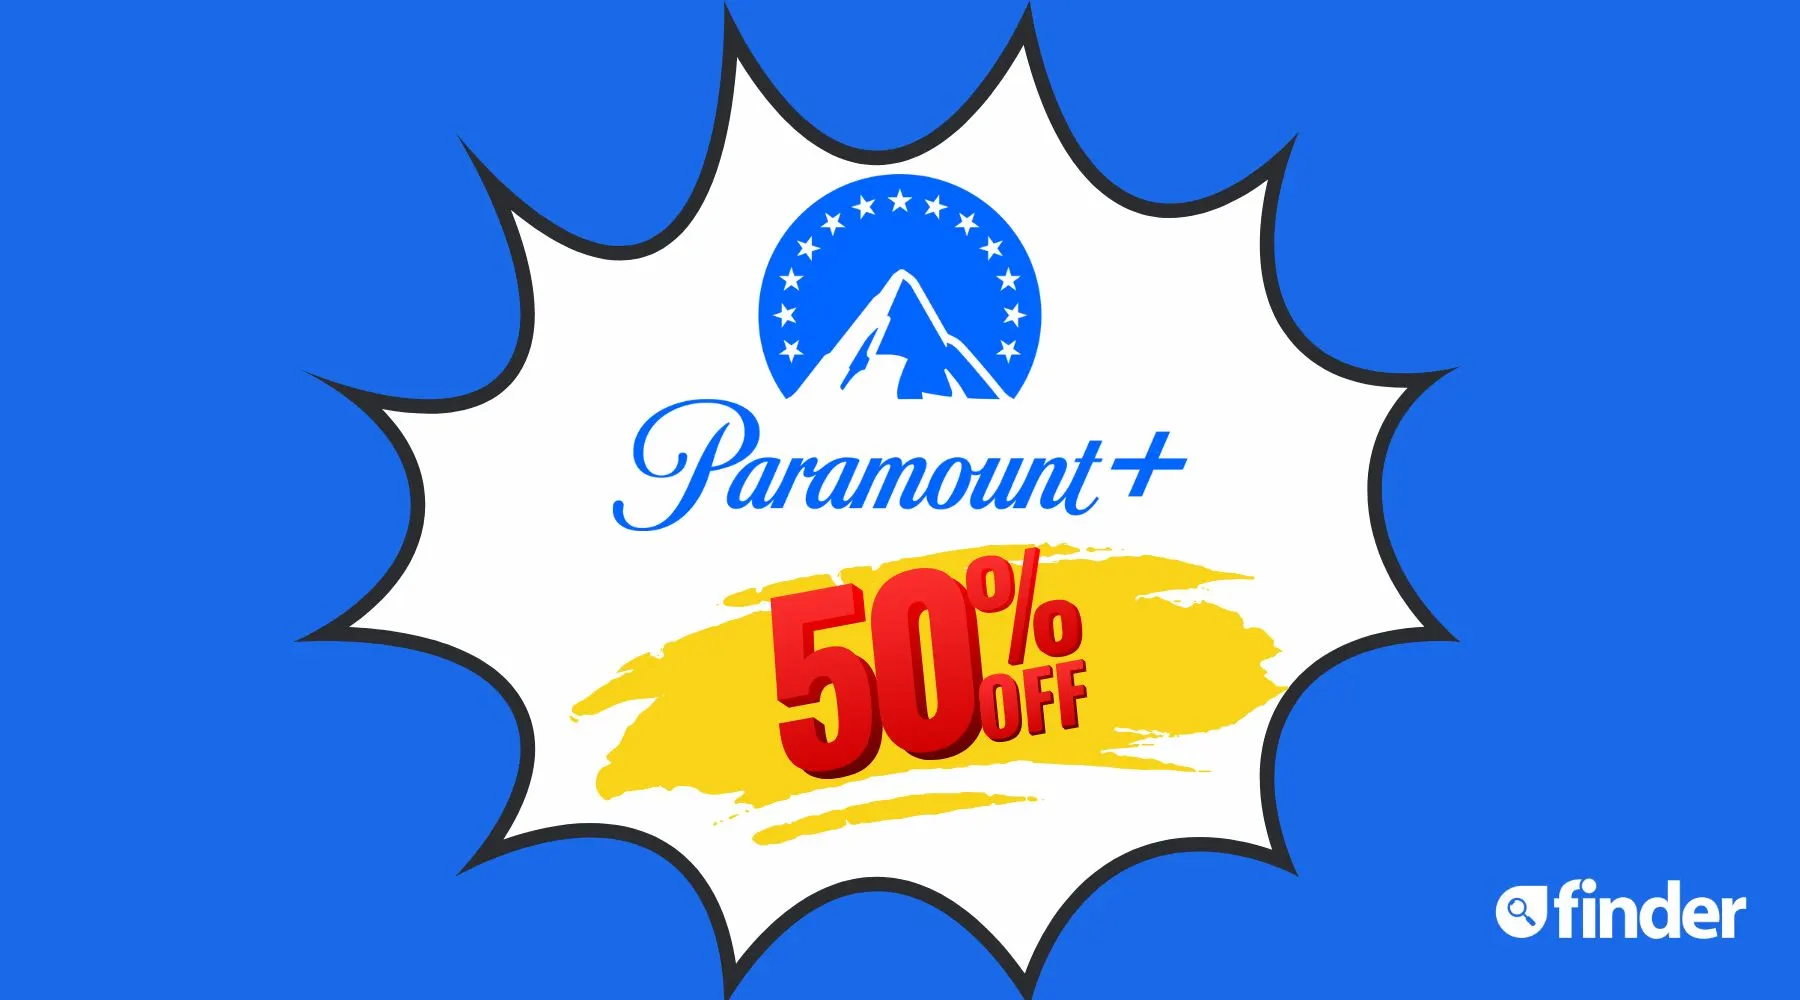 The Best Paramount+ Streaming Deals 2023: Save 50% Off Paramount